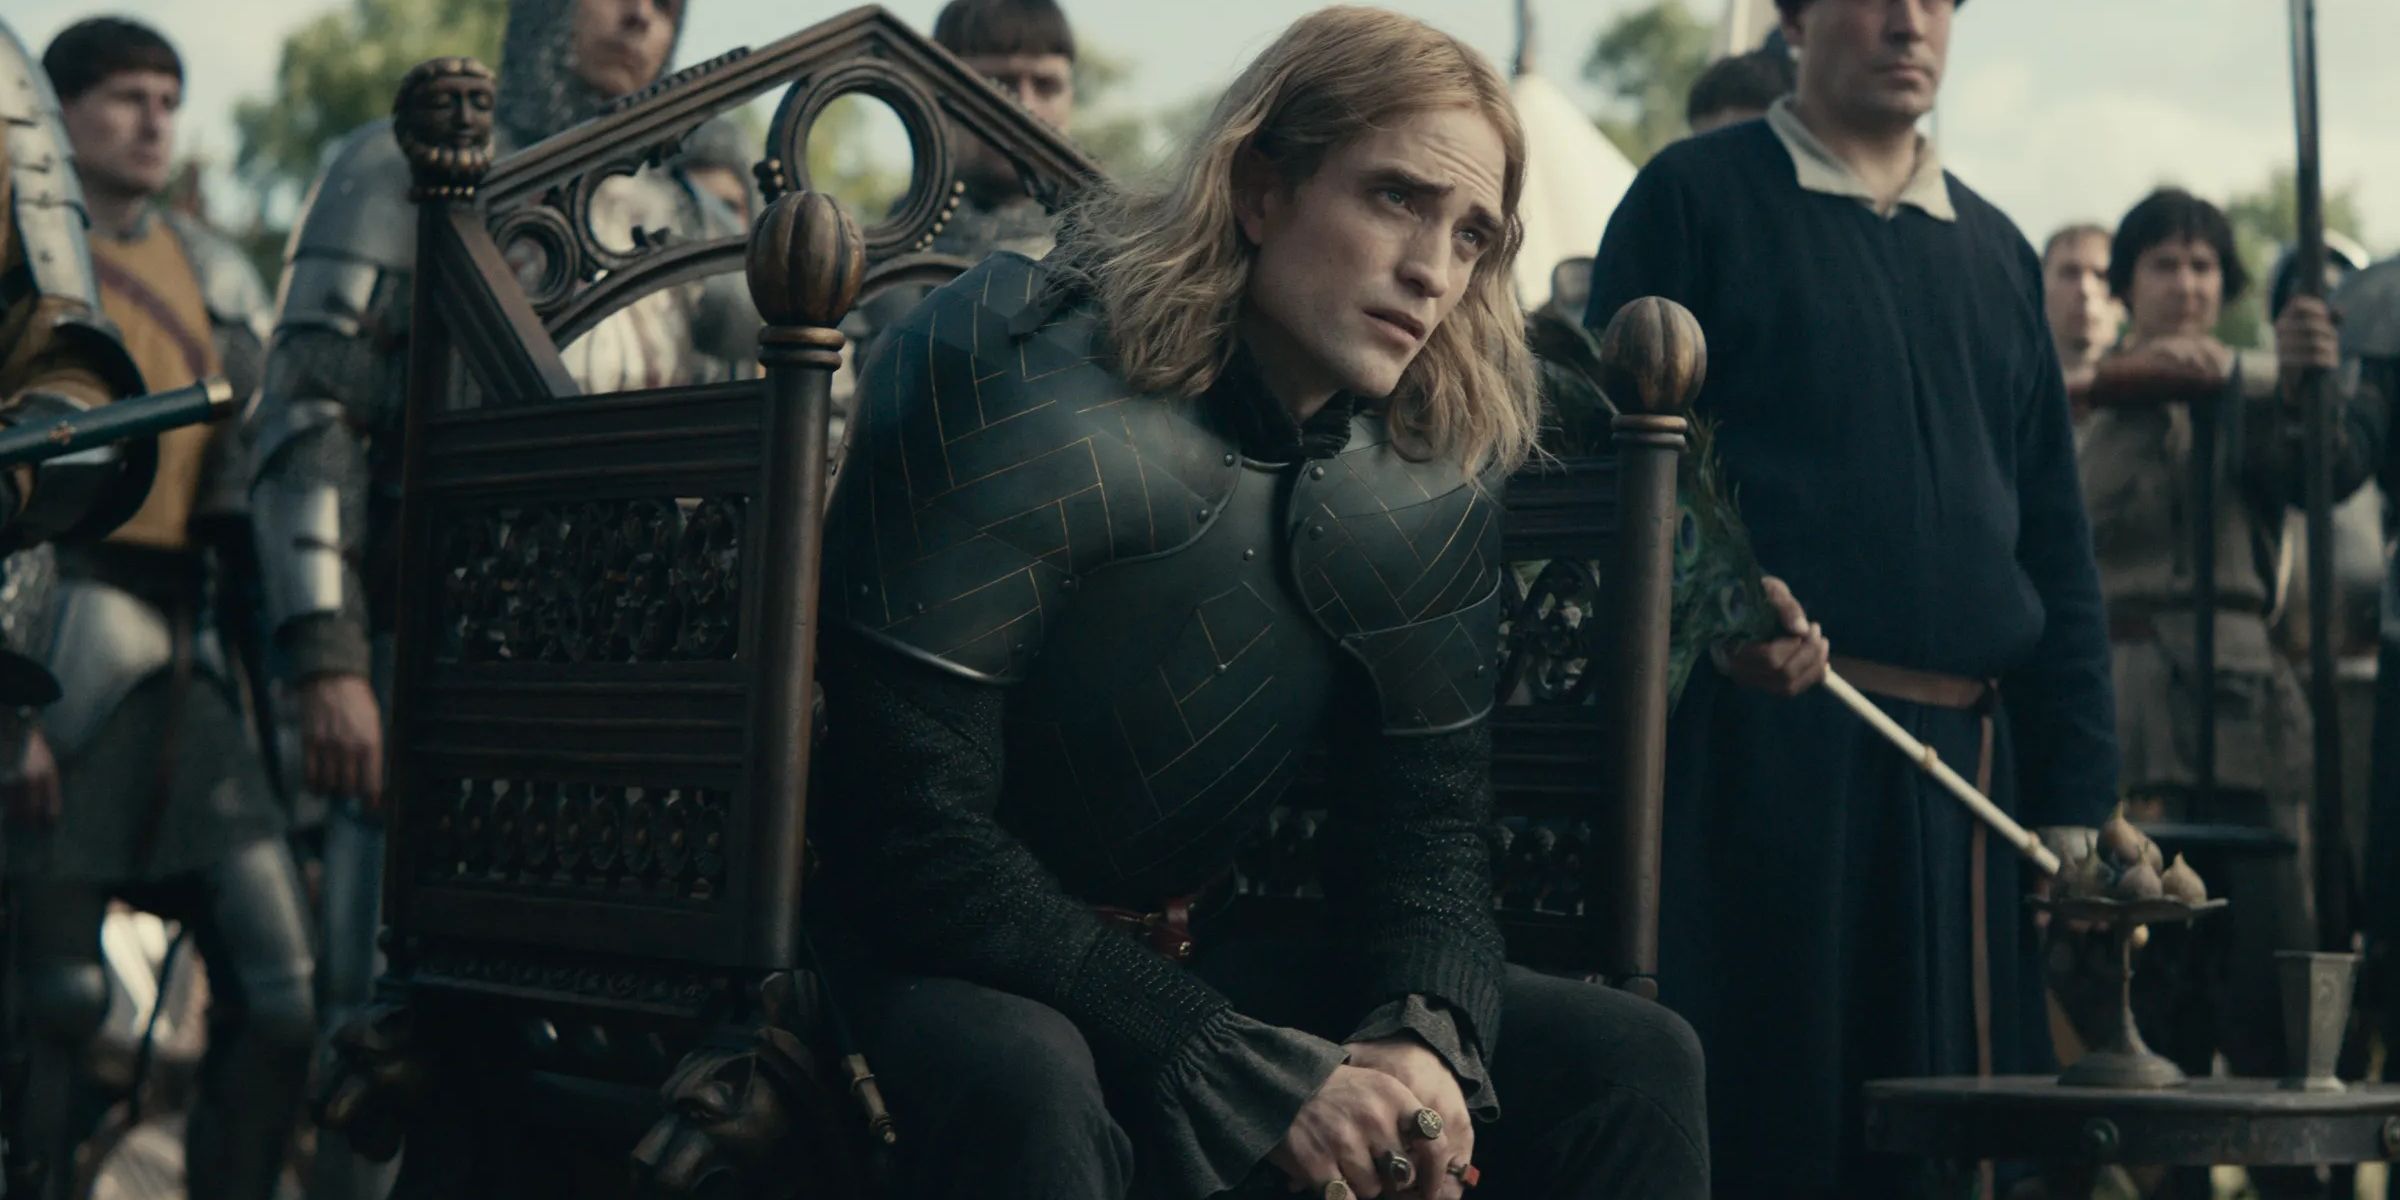 The Dauphen (Robert Pattinson) sitting in a small throne in The King